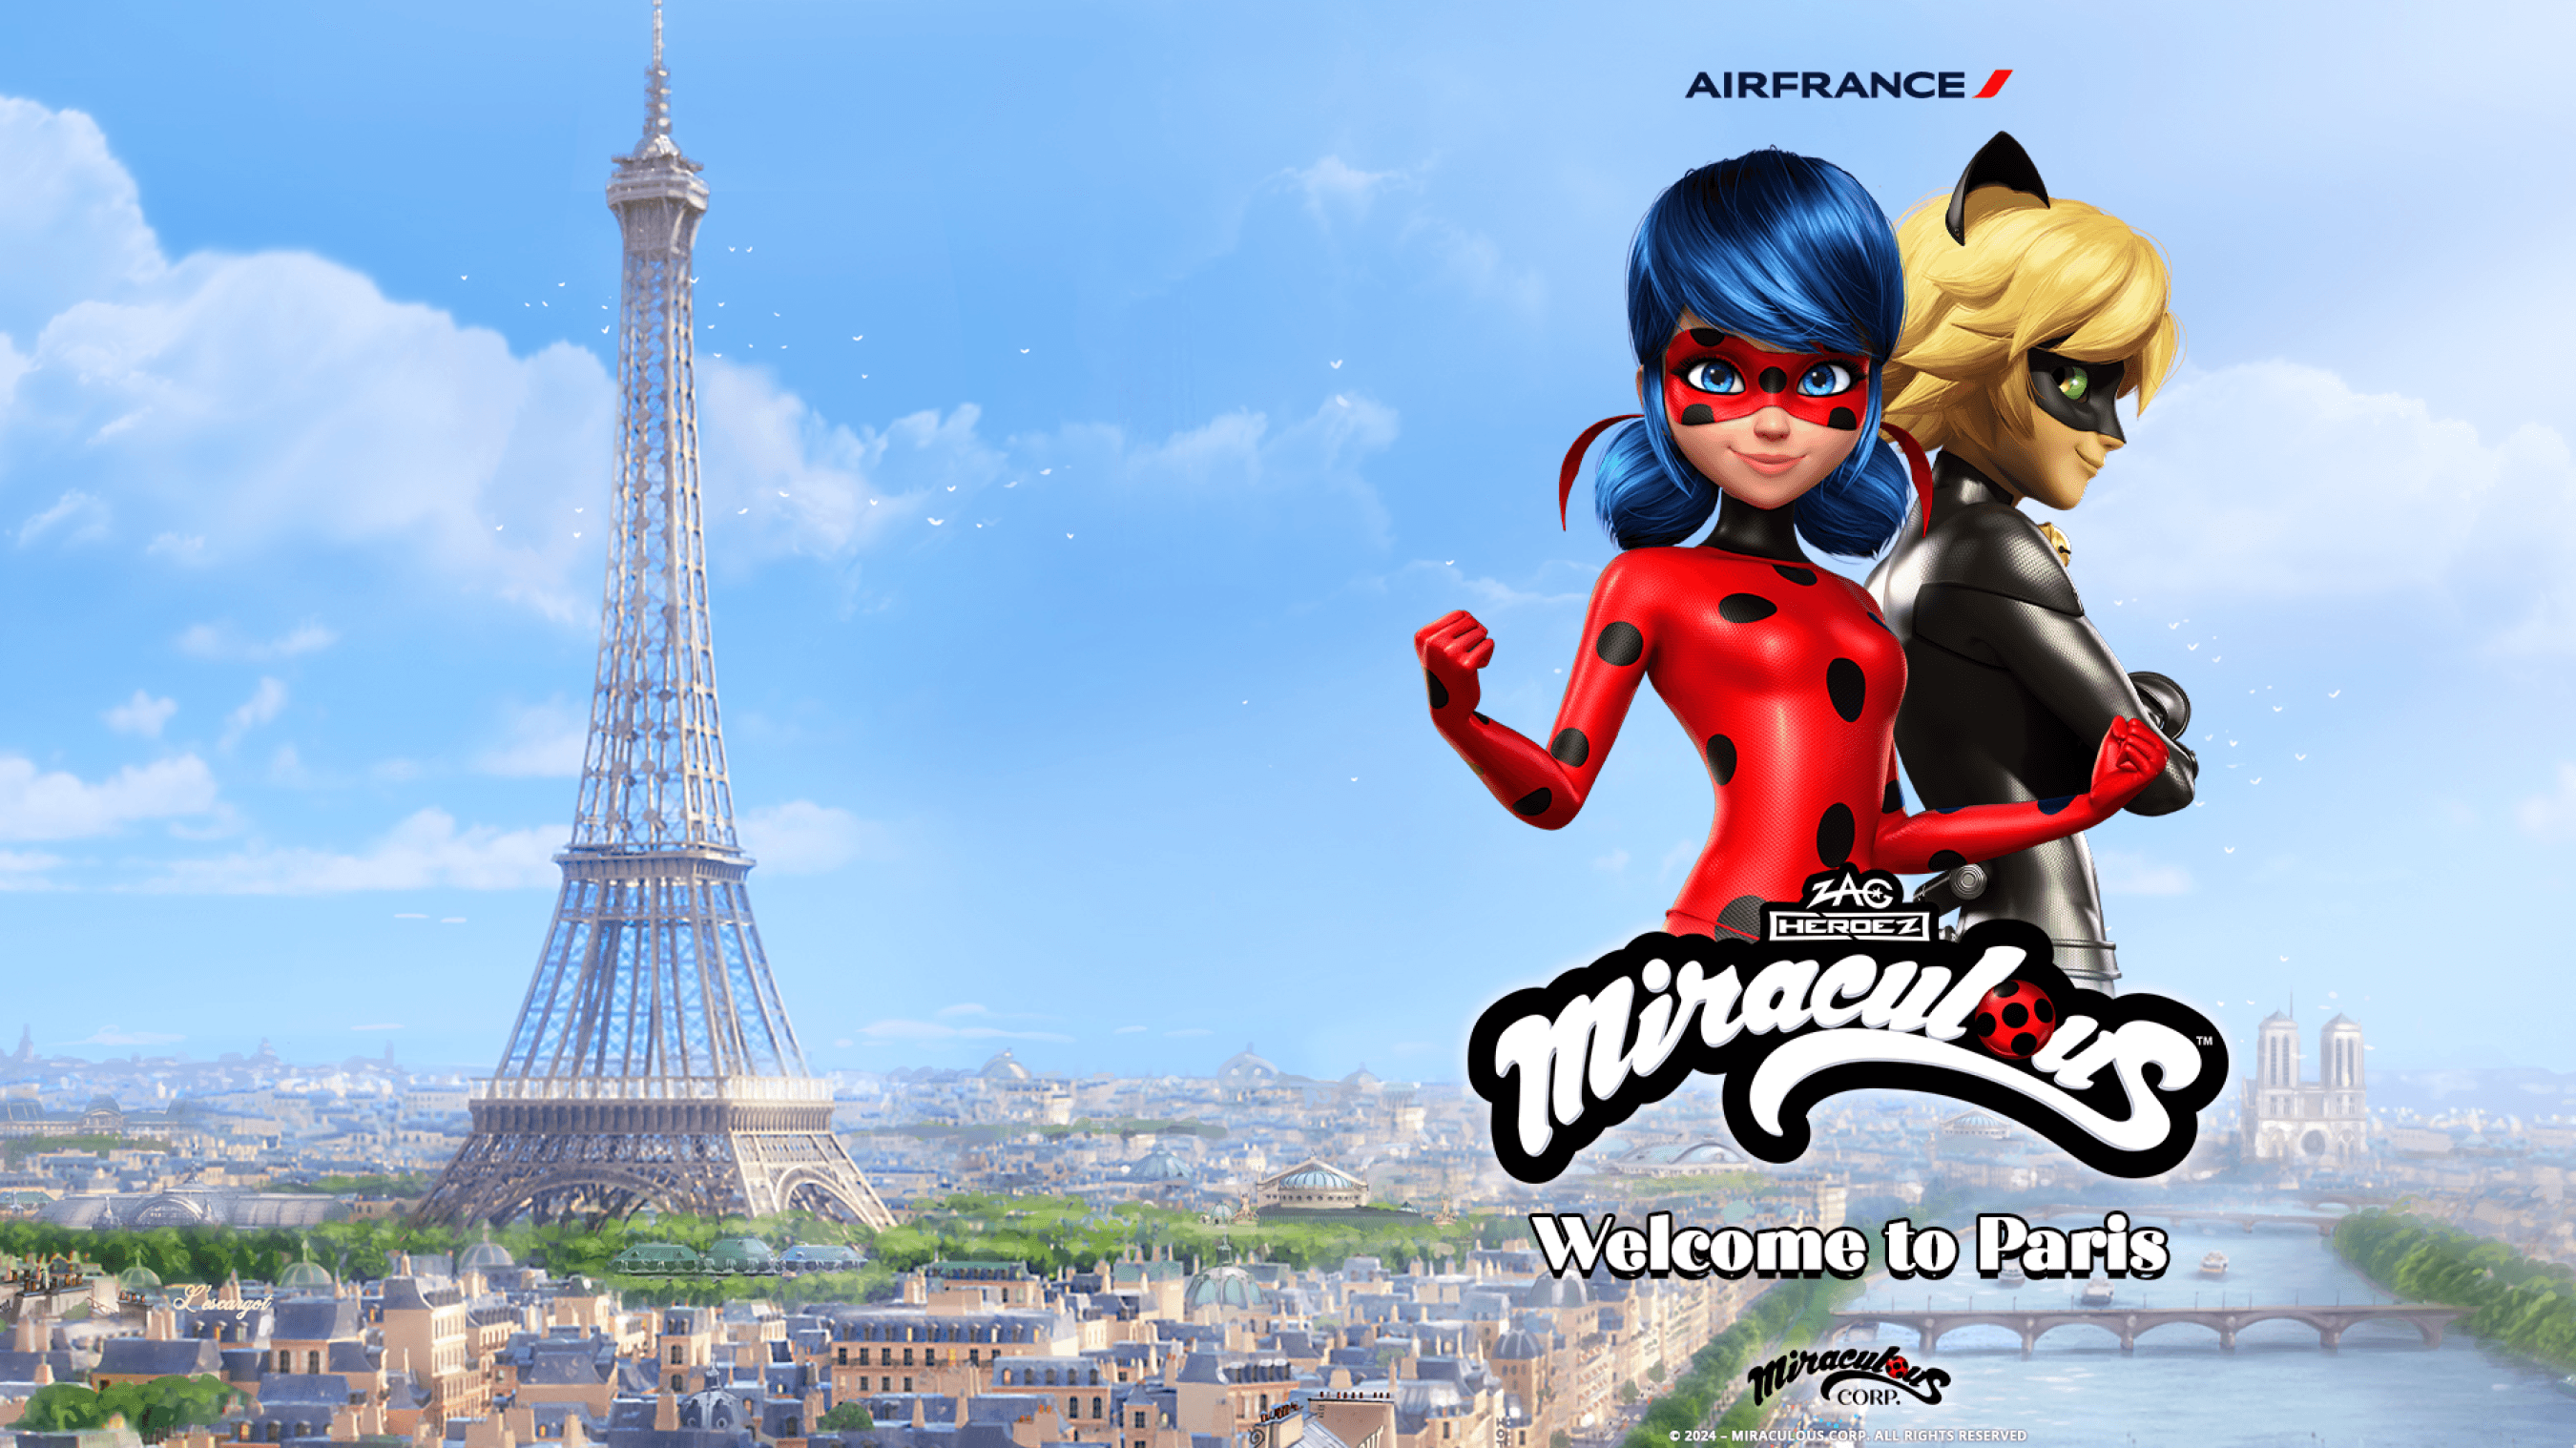 An image of the Eiffel Tower with the characters of the cartoon Miraculous